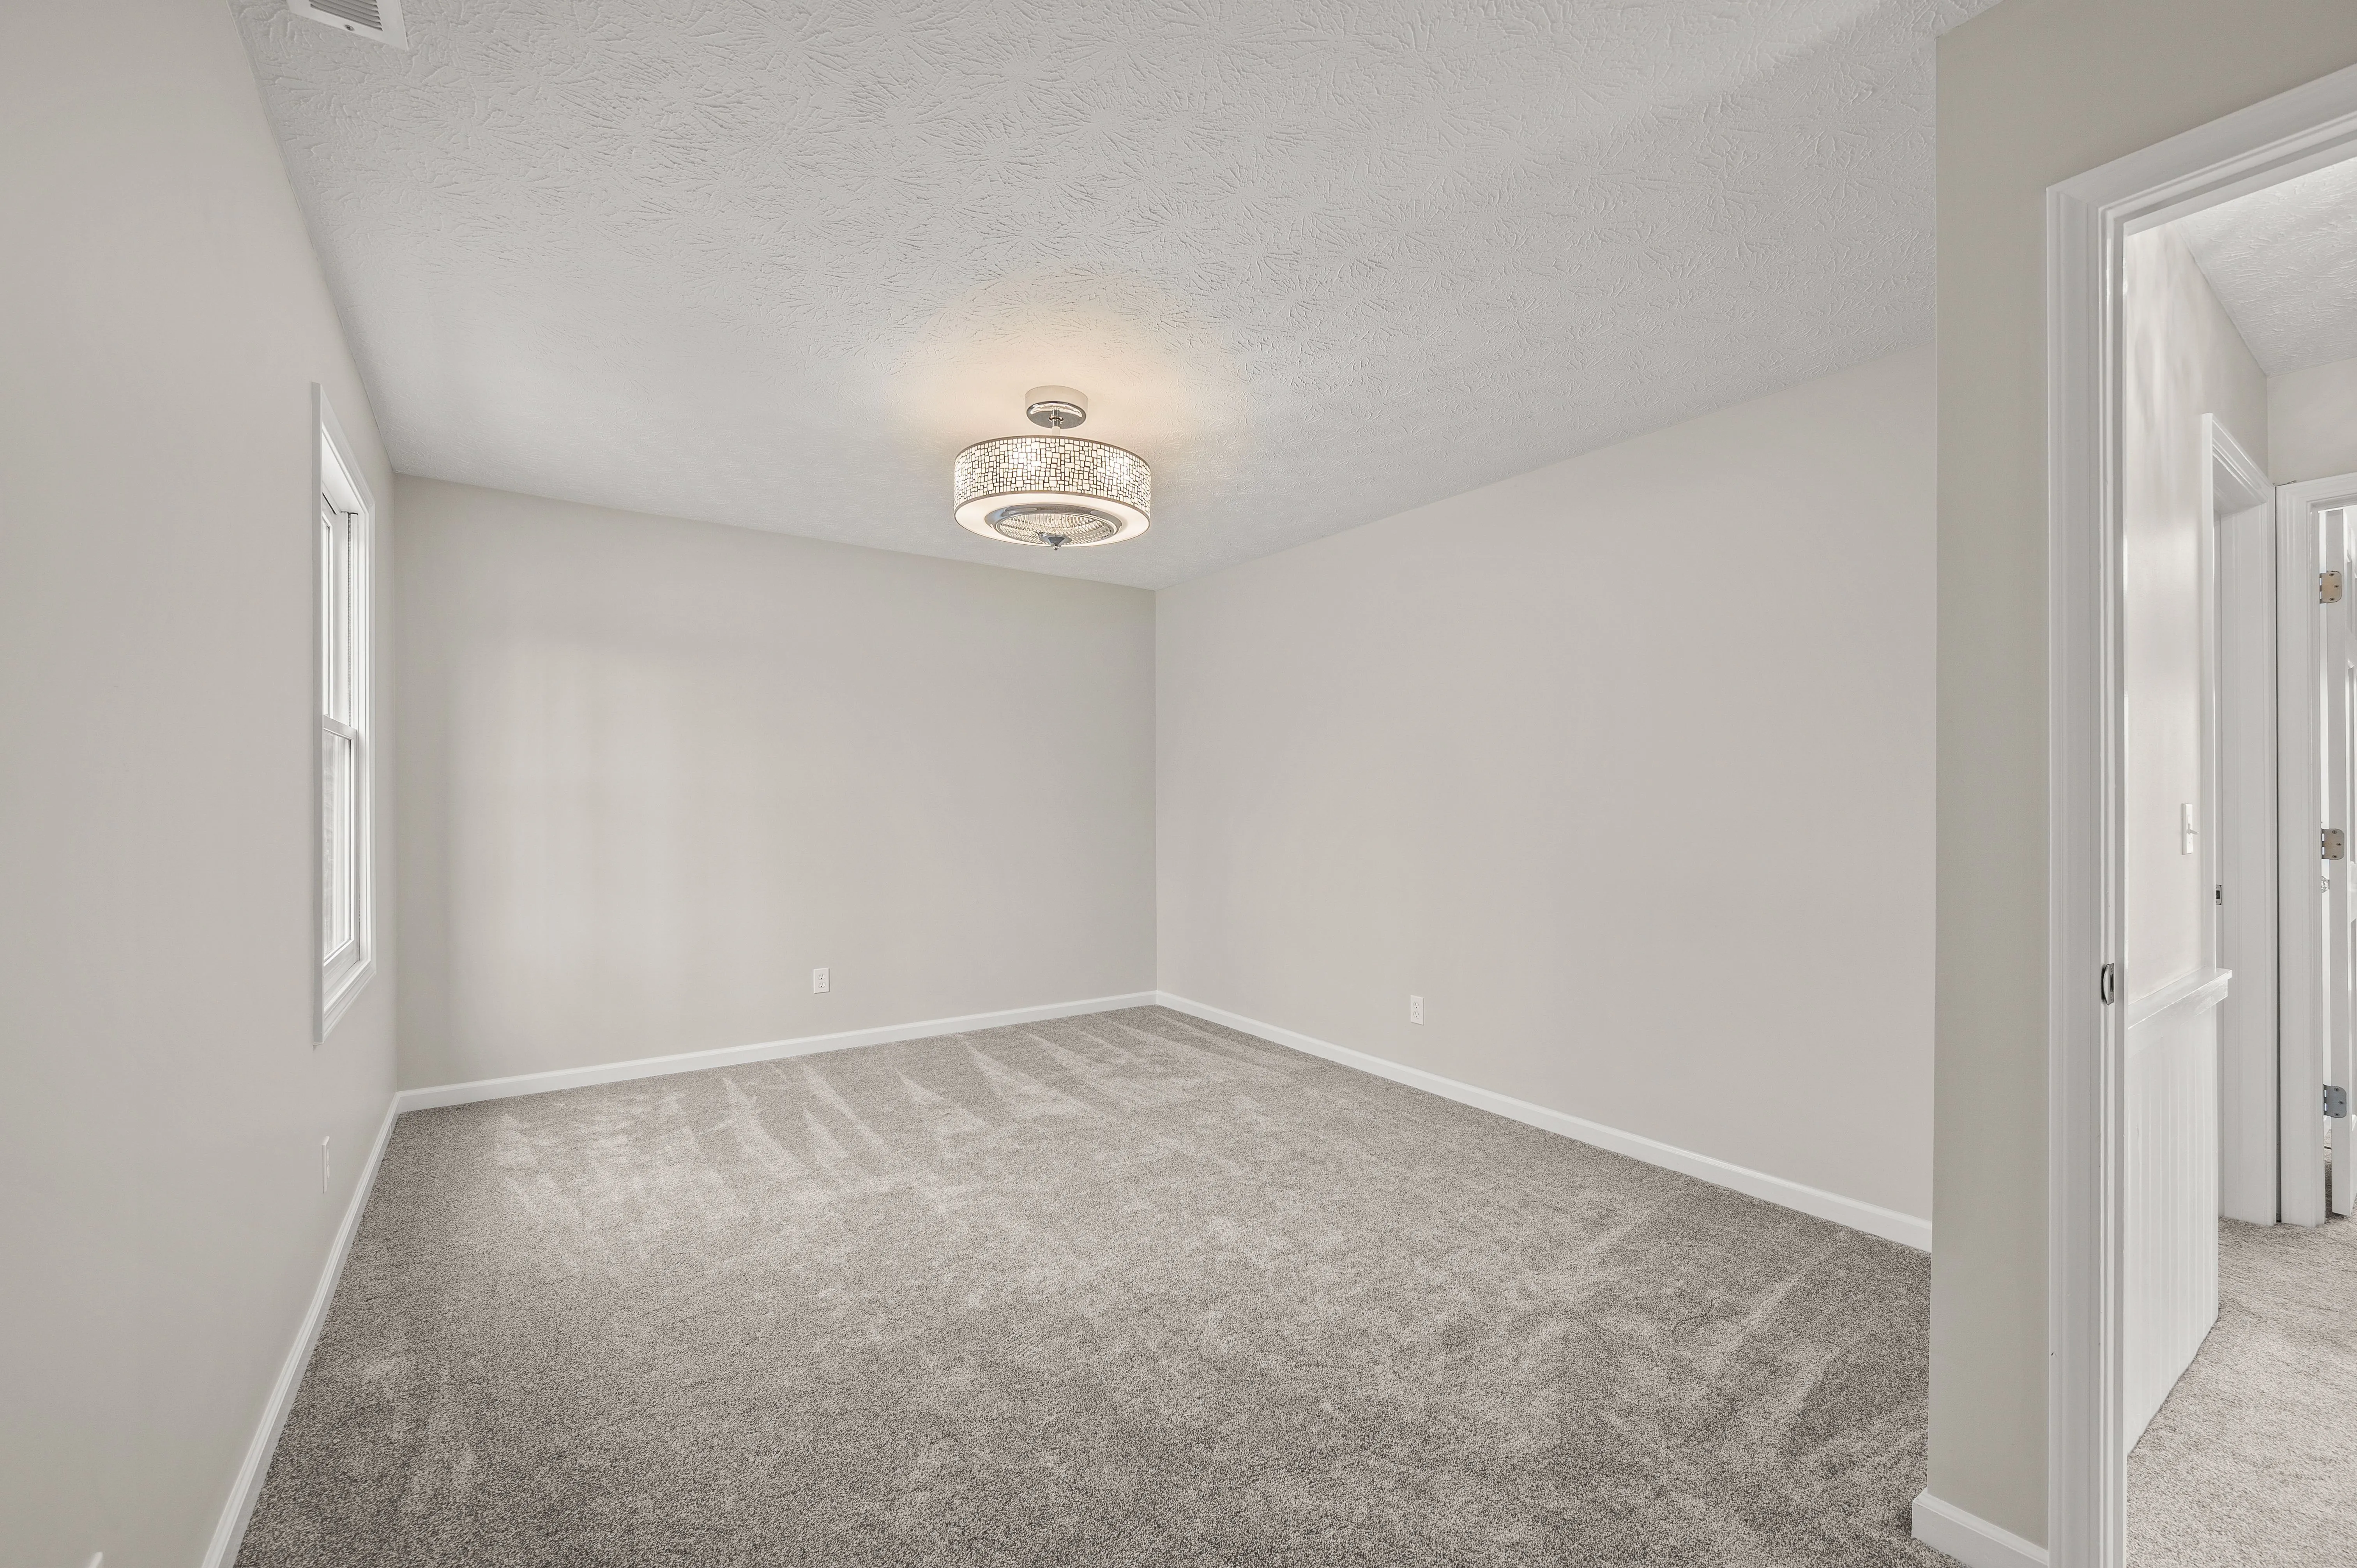 Empty room with light gray walls, carpeted floor, and a ceiling light fixture.